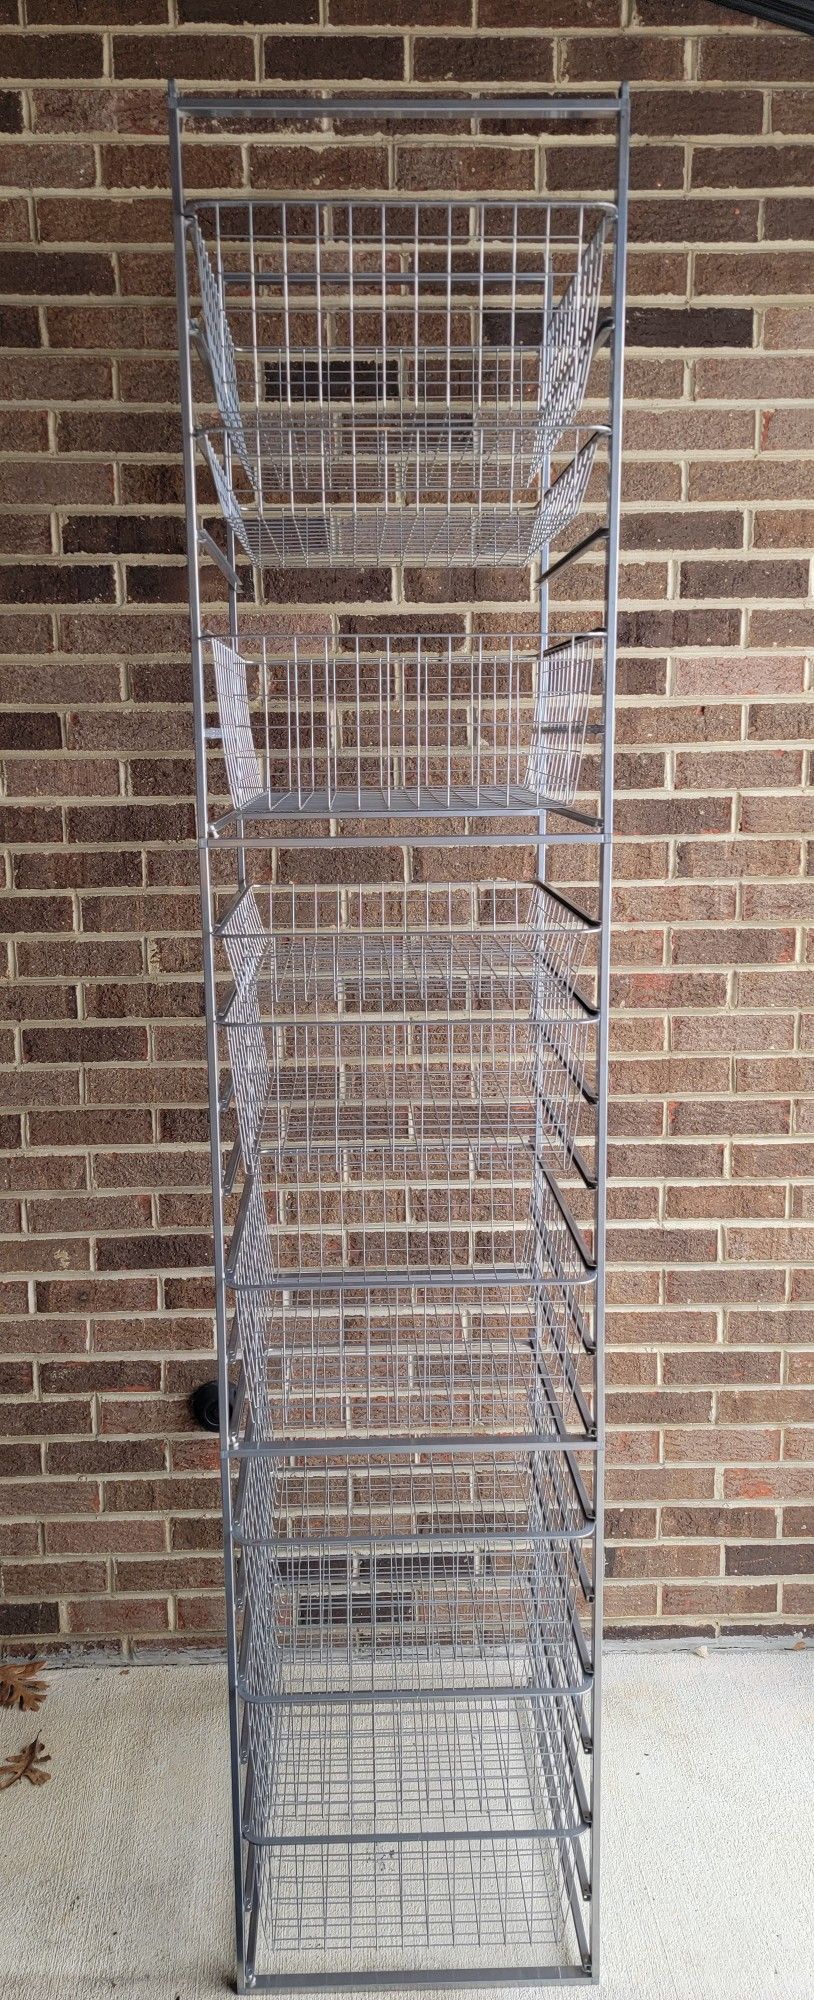 The Container Store Basket Storage Organizer OBO